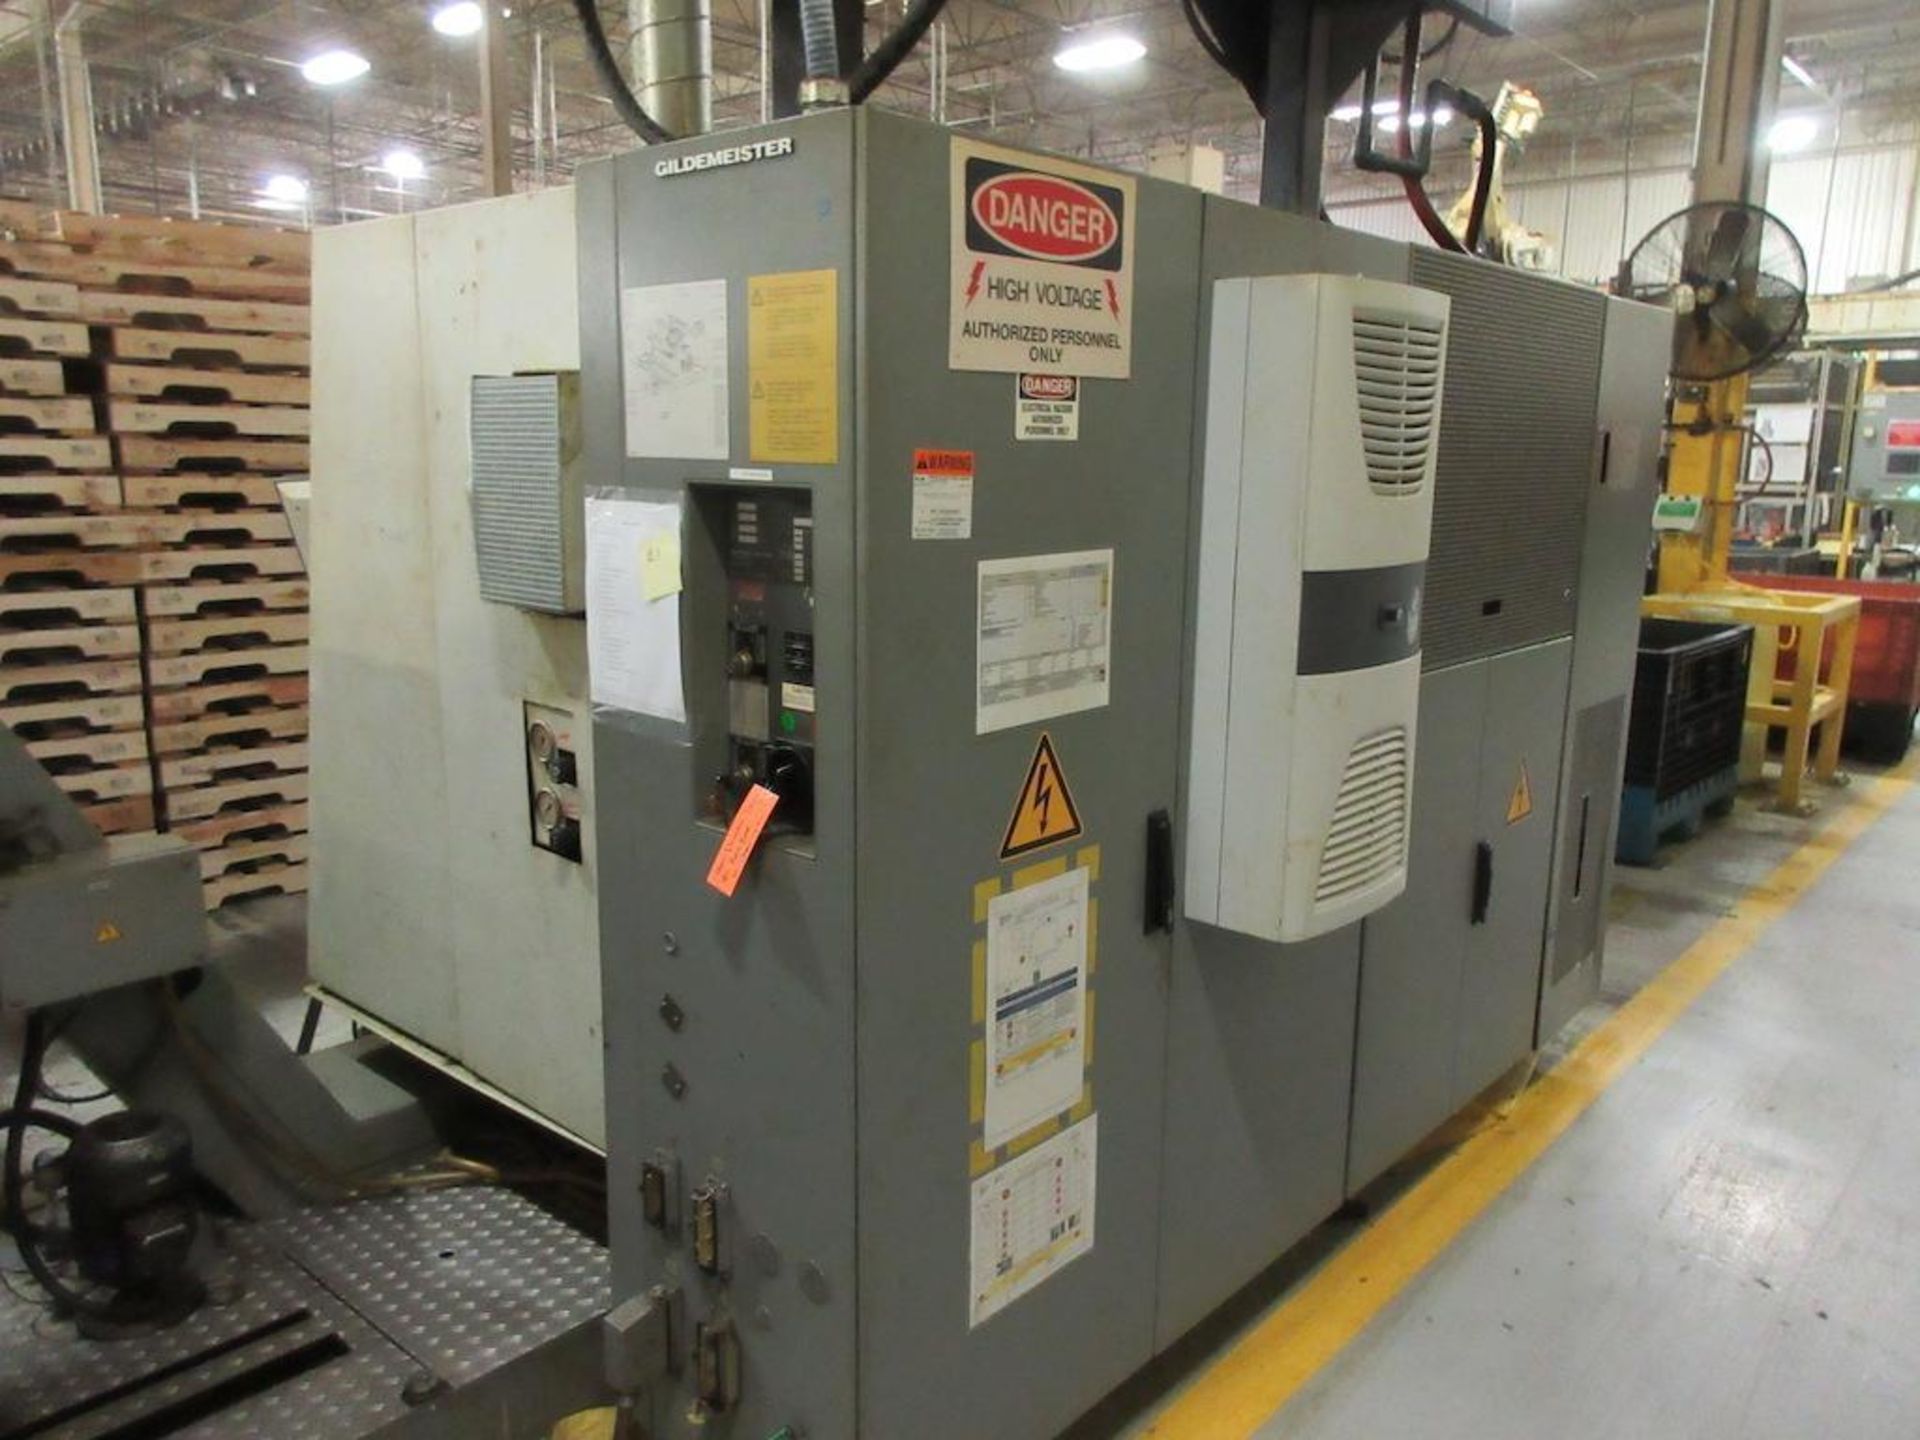 2004 DMG CNC Lathe, Model Twin 32, Twin Spindle, 4 Axis, CNC Control, Bar Material Diameter 32 mm, - Image 13 of 18